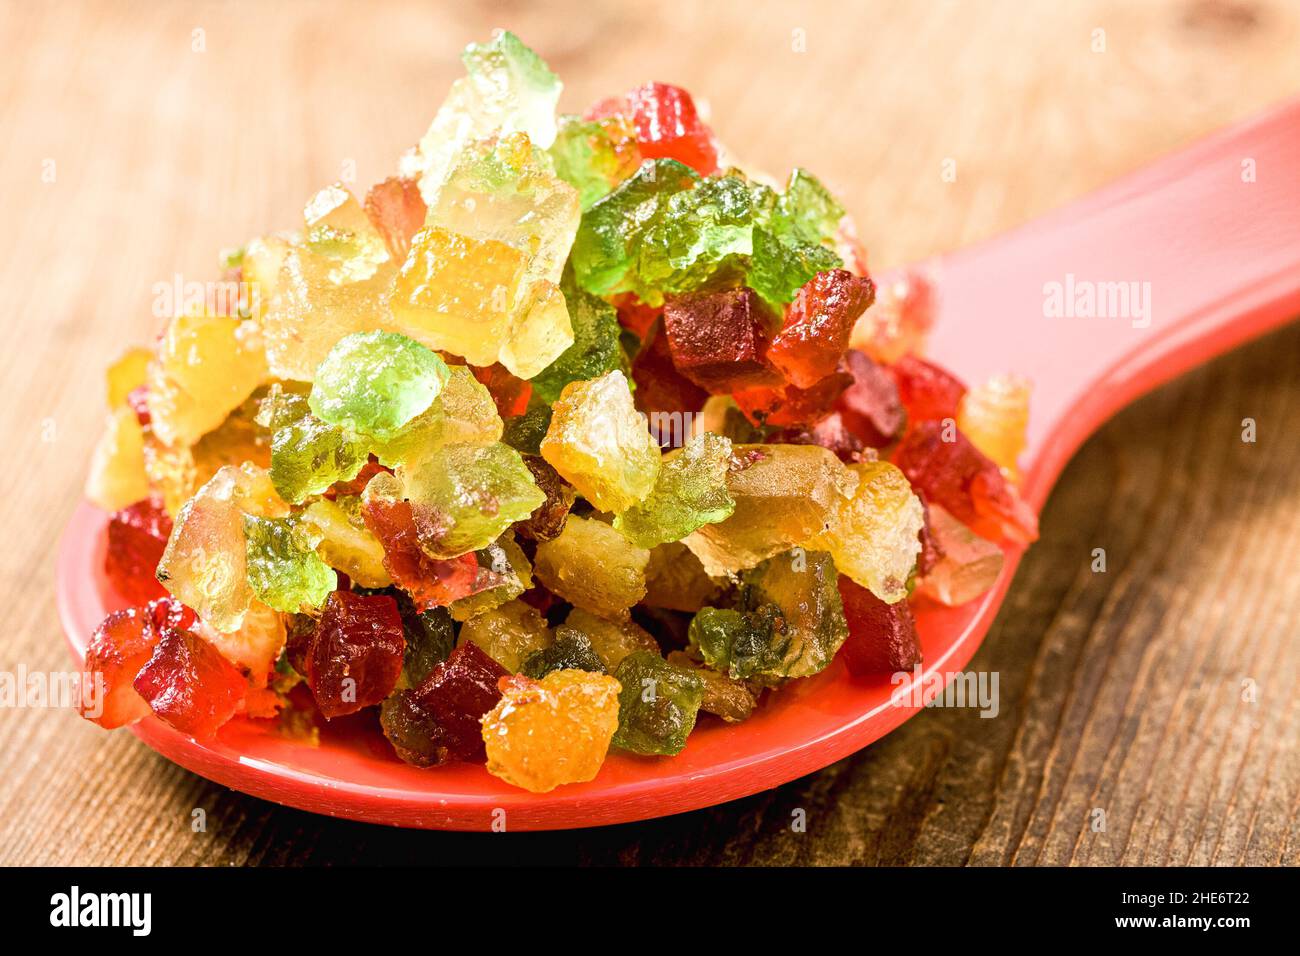 Candied fruit ixed on spoon Stock Photo